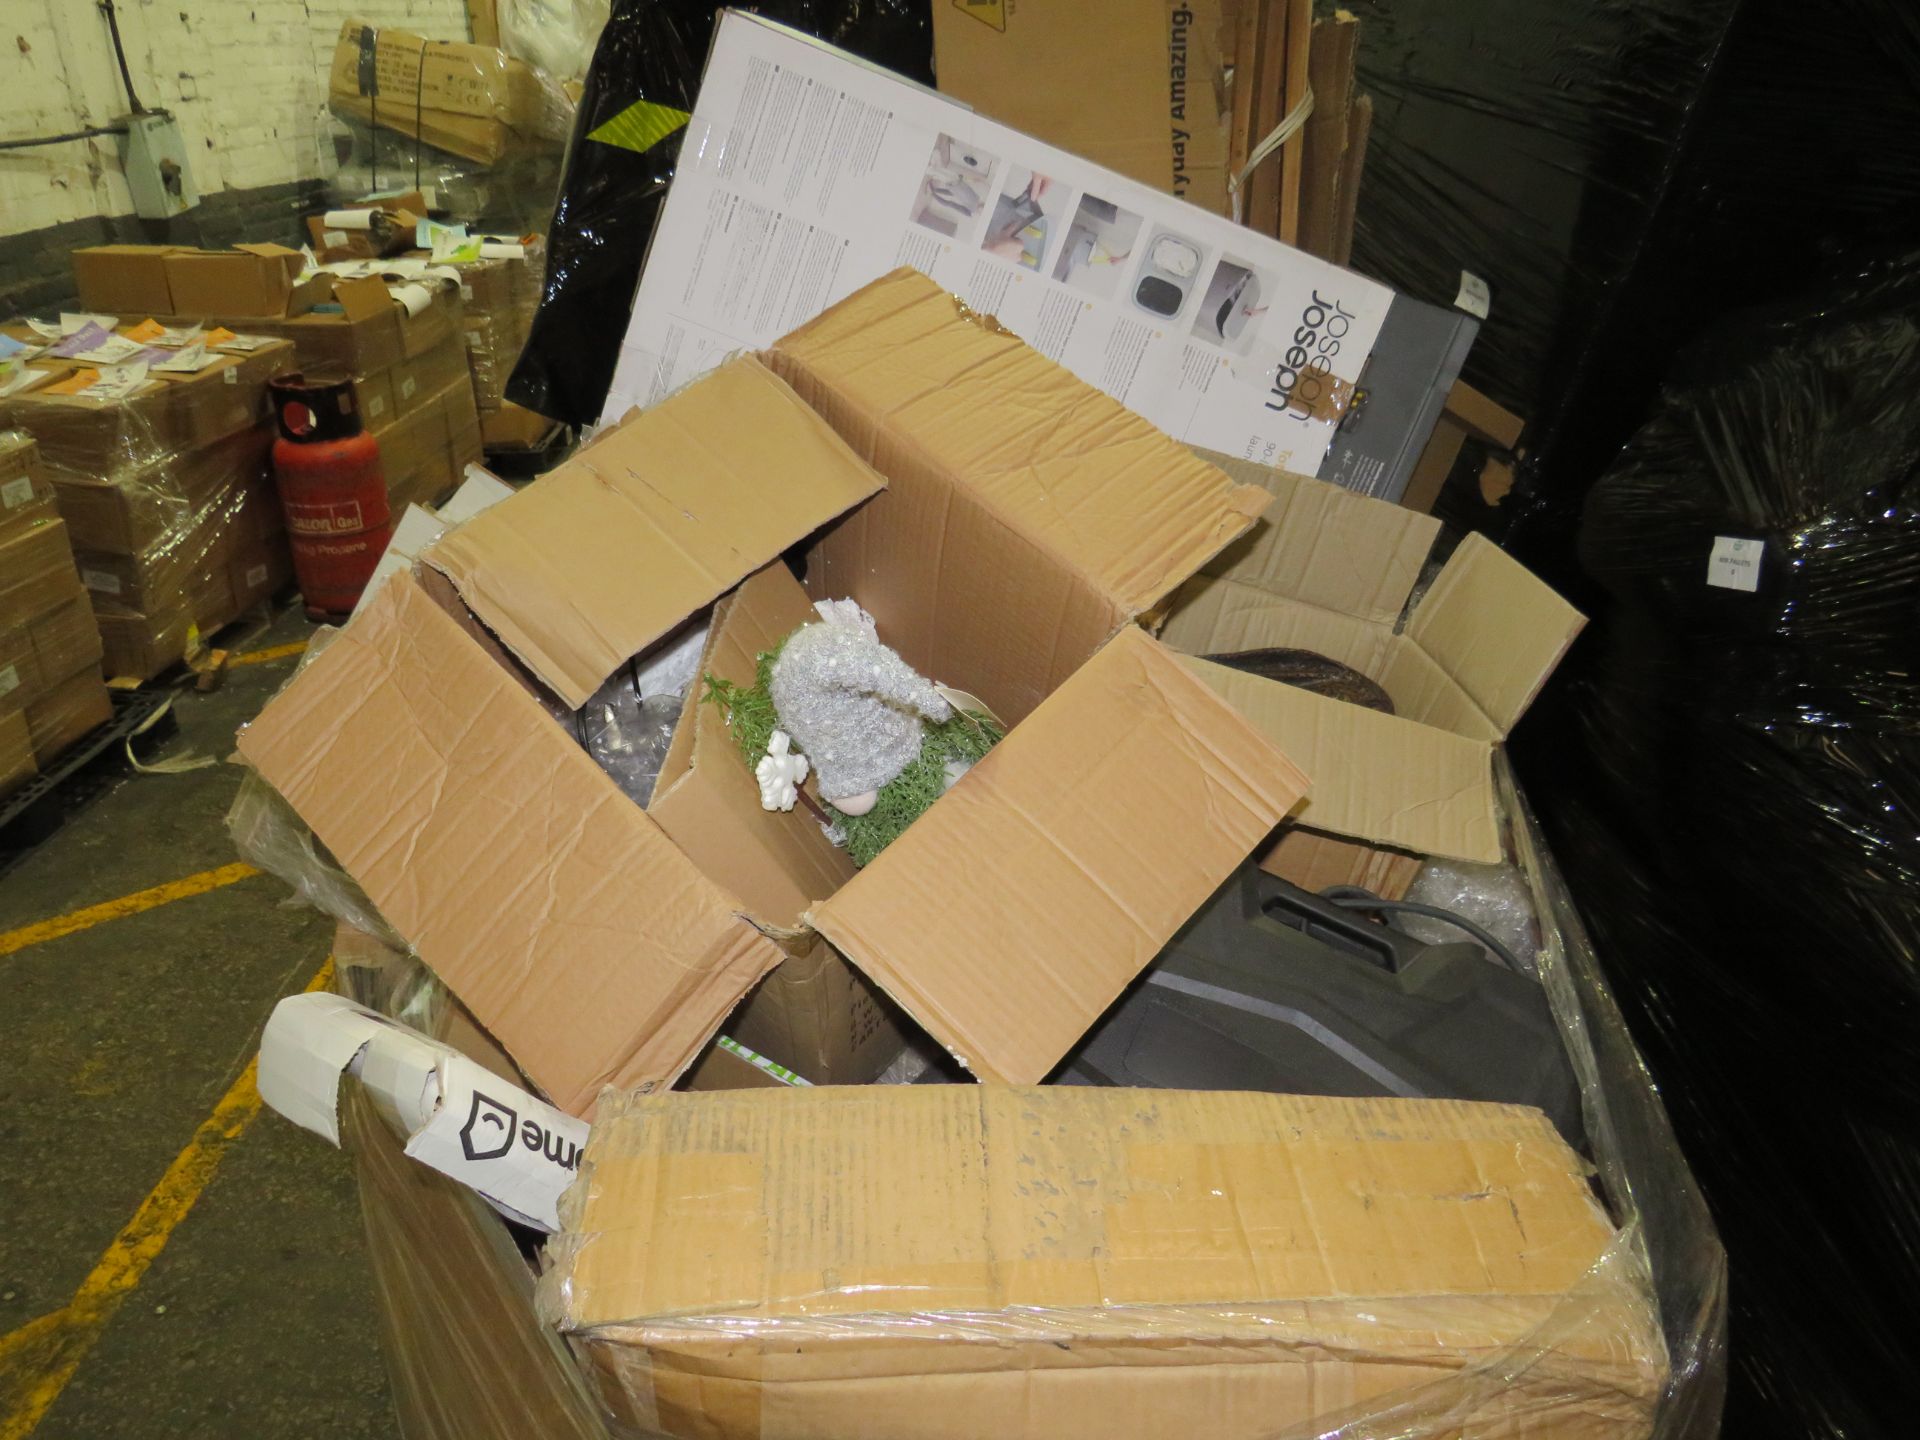 1x Pallet Containing Mixed Returned Item From B&Q - Outdoor Furniture, Tools, Flooring Etc - All May - Image 2 of 3